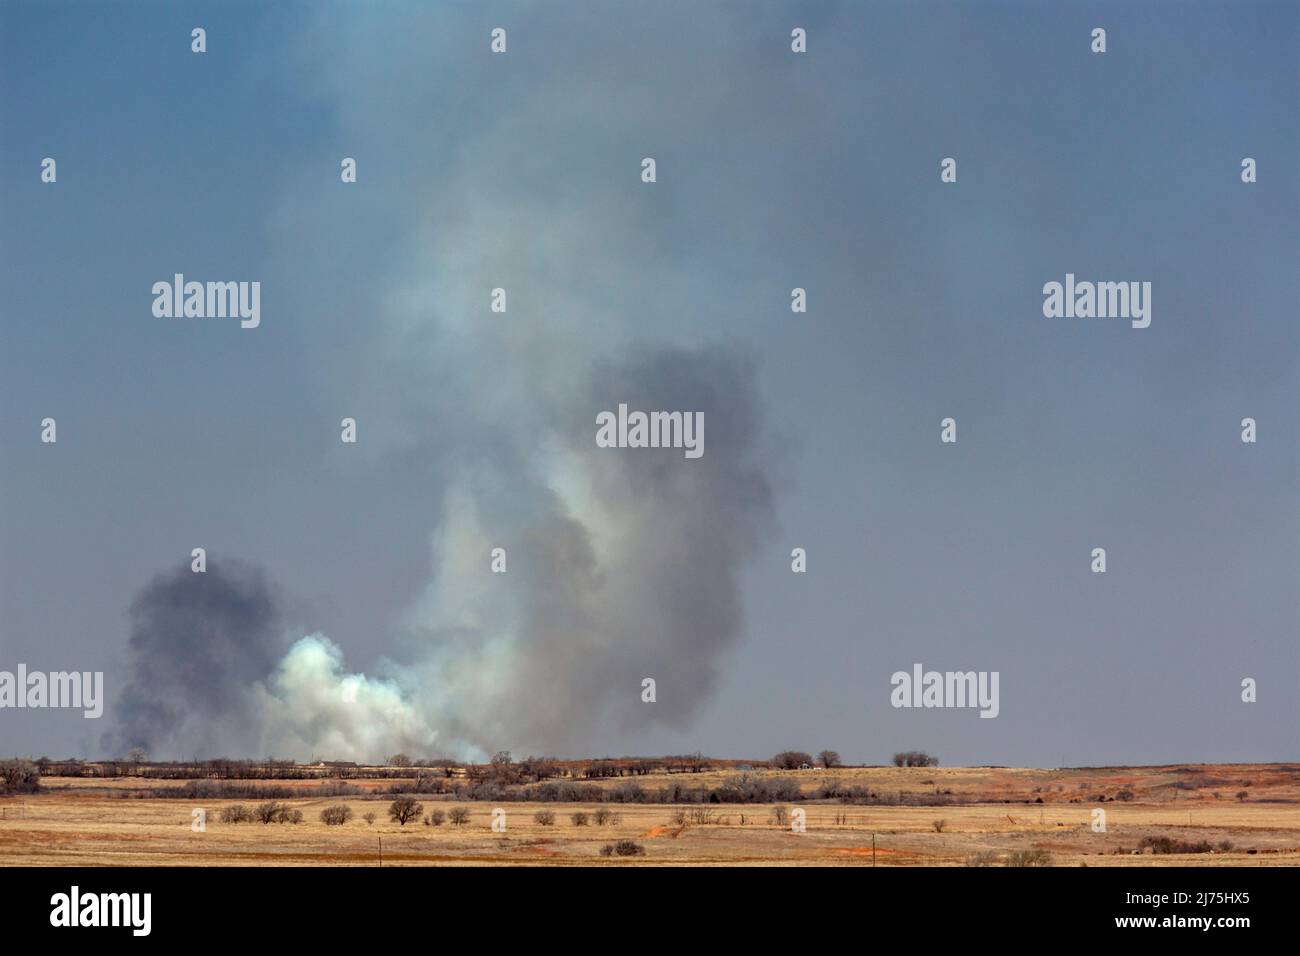 Sweetwater, Oklahoma - A fire on grasslands in western Oklahoma. Stock Photo